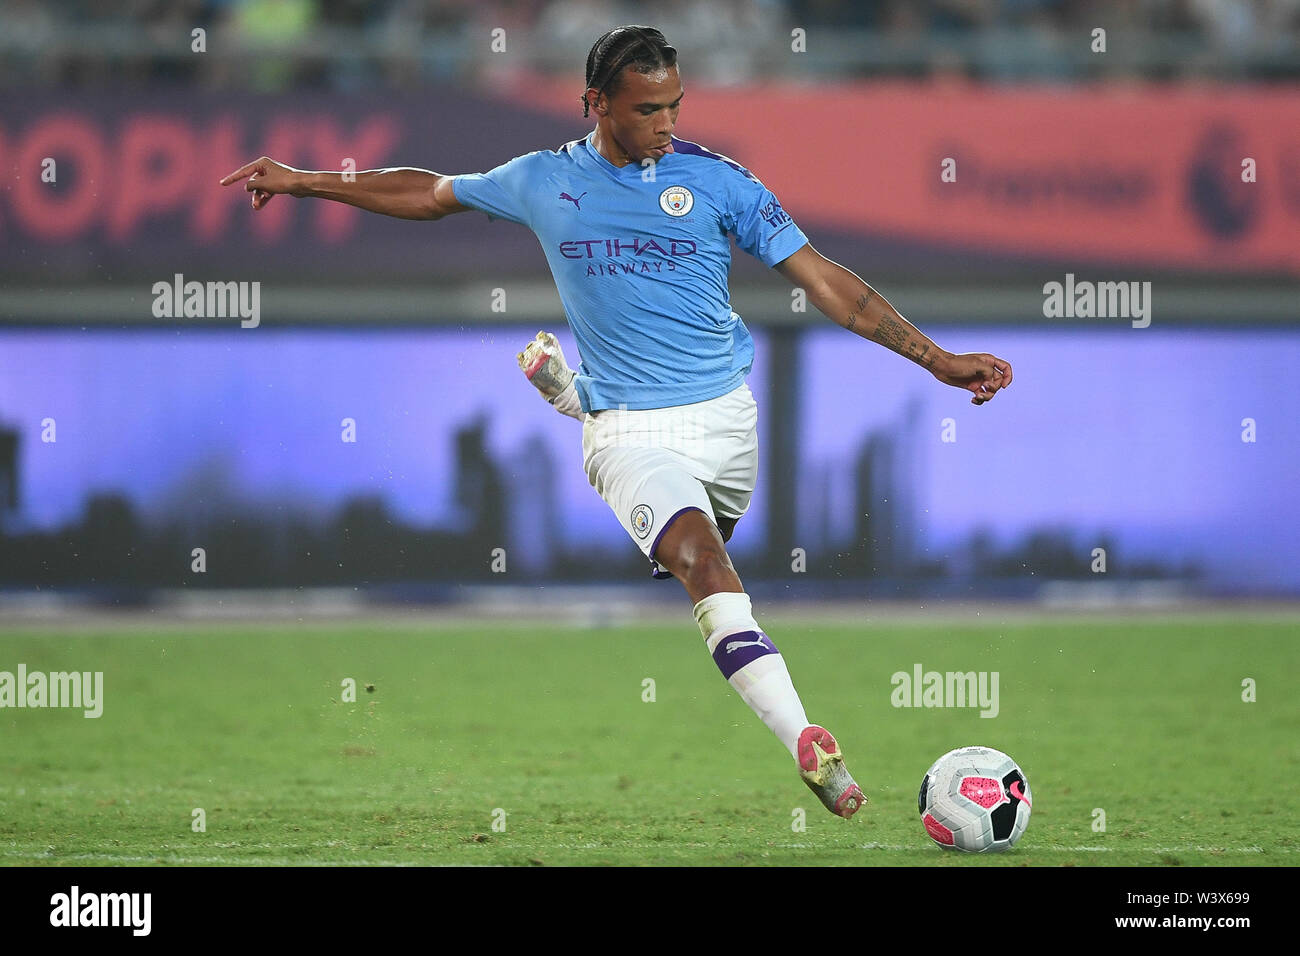 German football player Leroy Sane of Manchester City F.C. of English League champions dribbles against West Ham United F.C. in the semifinal match of the Premier League Asia Trophy 2019 in Nanjing city, east China's Jiangsu province, 17 July 2019. Manchester City F.C. defeated West Ham United F.C. 4-1. Stock Photo